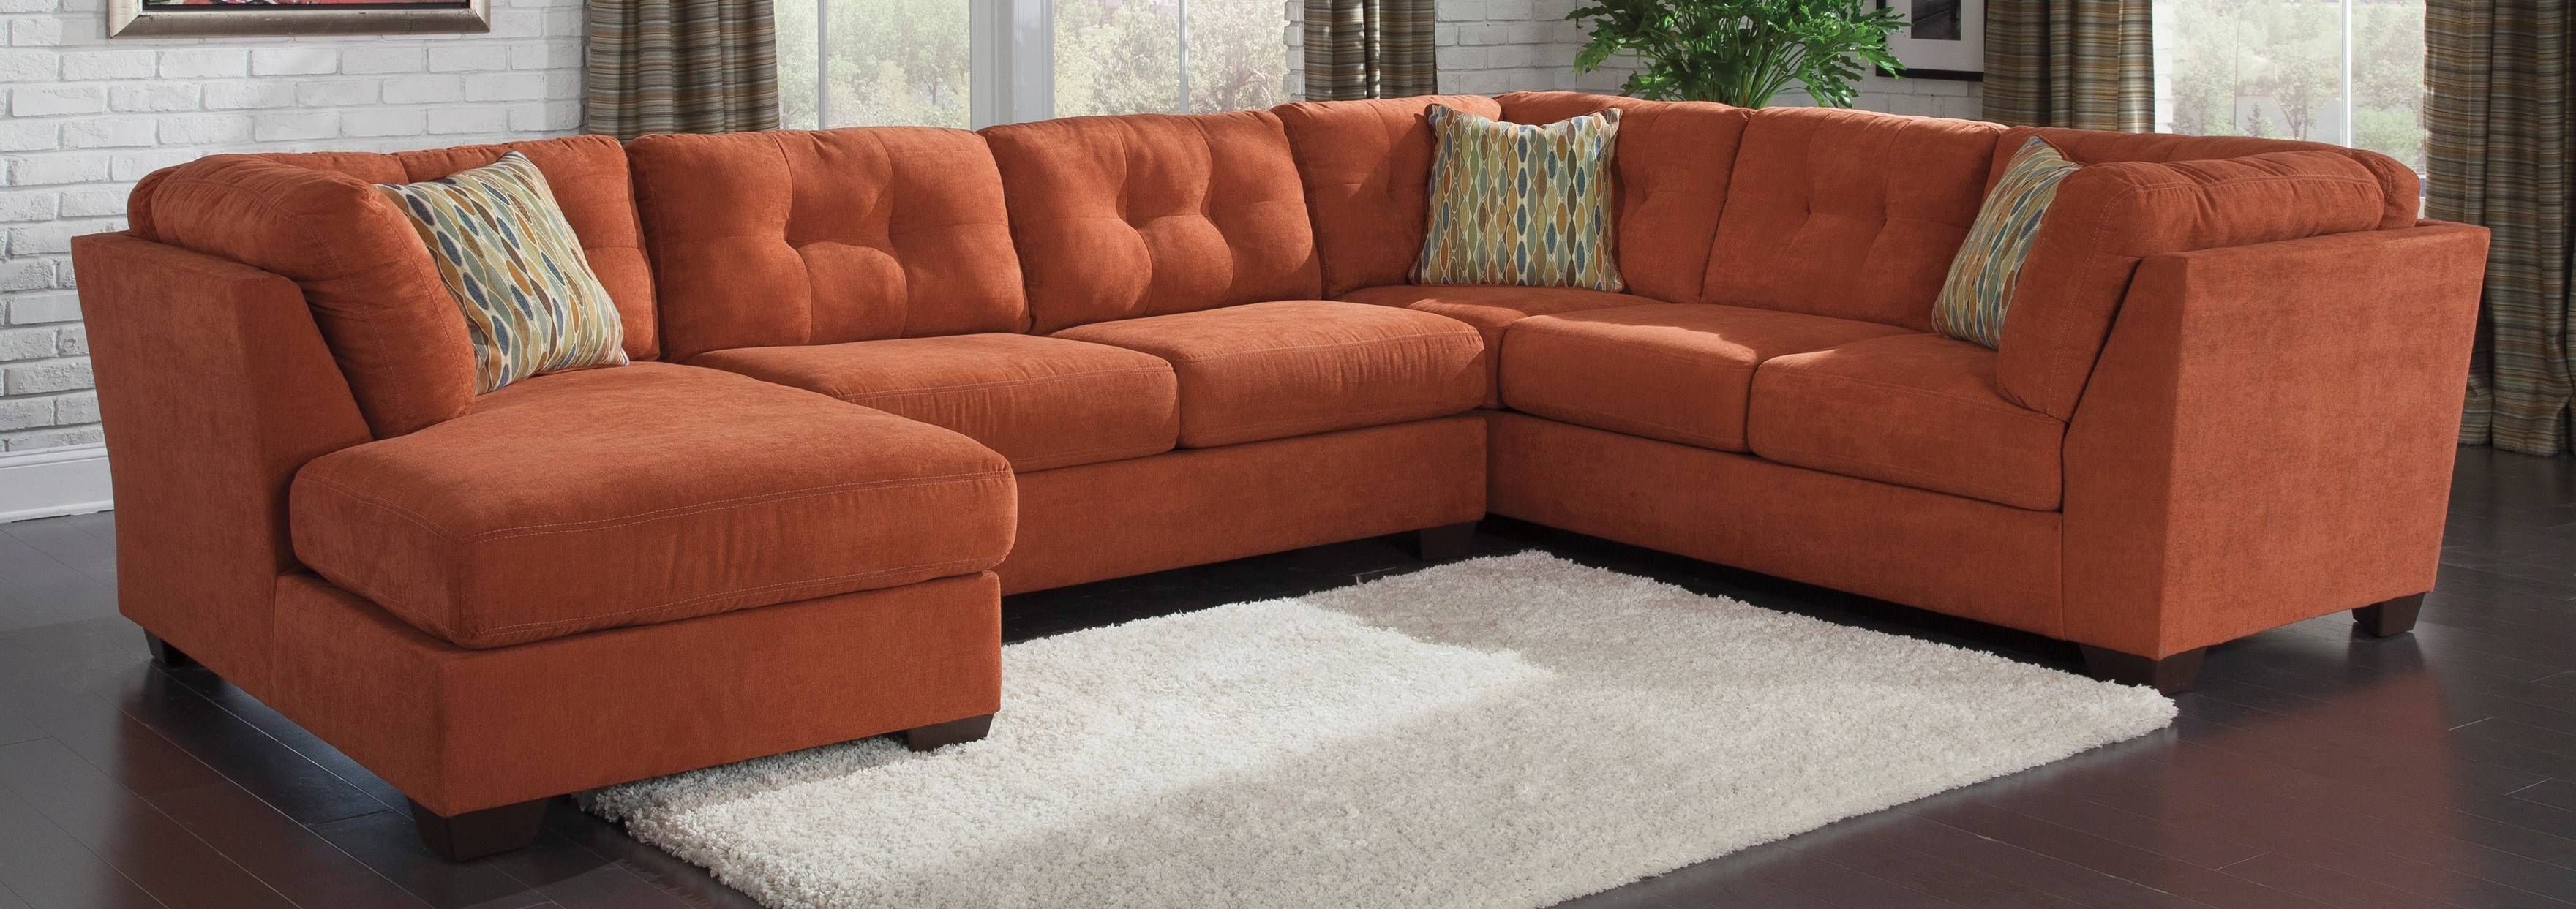 Ashley Furniture Delta City Rust Laf Corner Chaise Sectional Inside Burnt Orange Sectional Sofas (View 15 of 15)